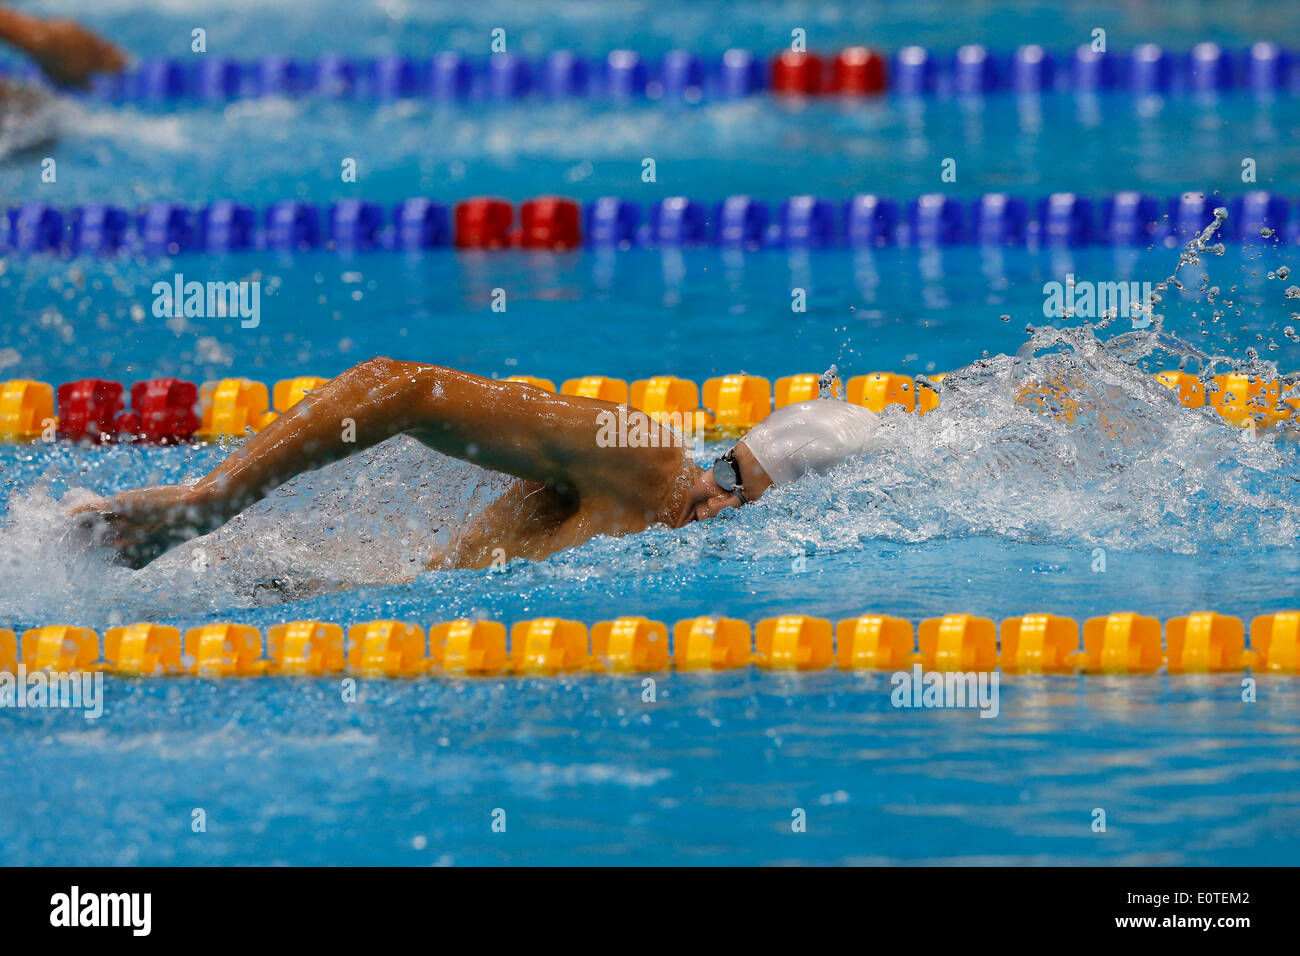 Jon Margeir Sverrisson of Iceland on his way to win the gold during the men's 200m Freestyle - S14 final swimming session competition held at the Aquatics Center during the London 2012 Paralympic Games in London, Britain, 02 September 2012. Stock Photo